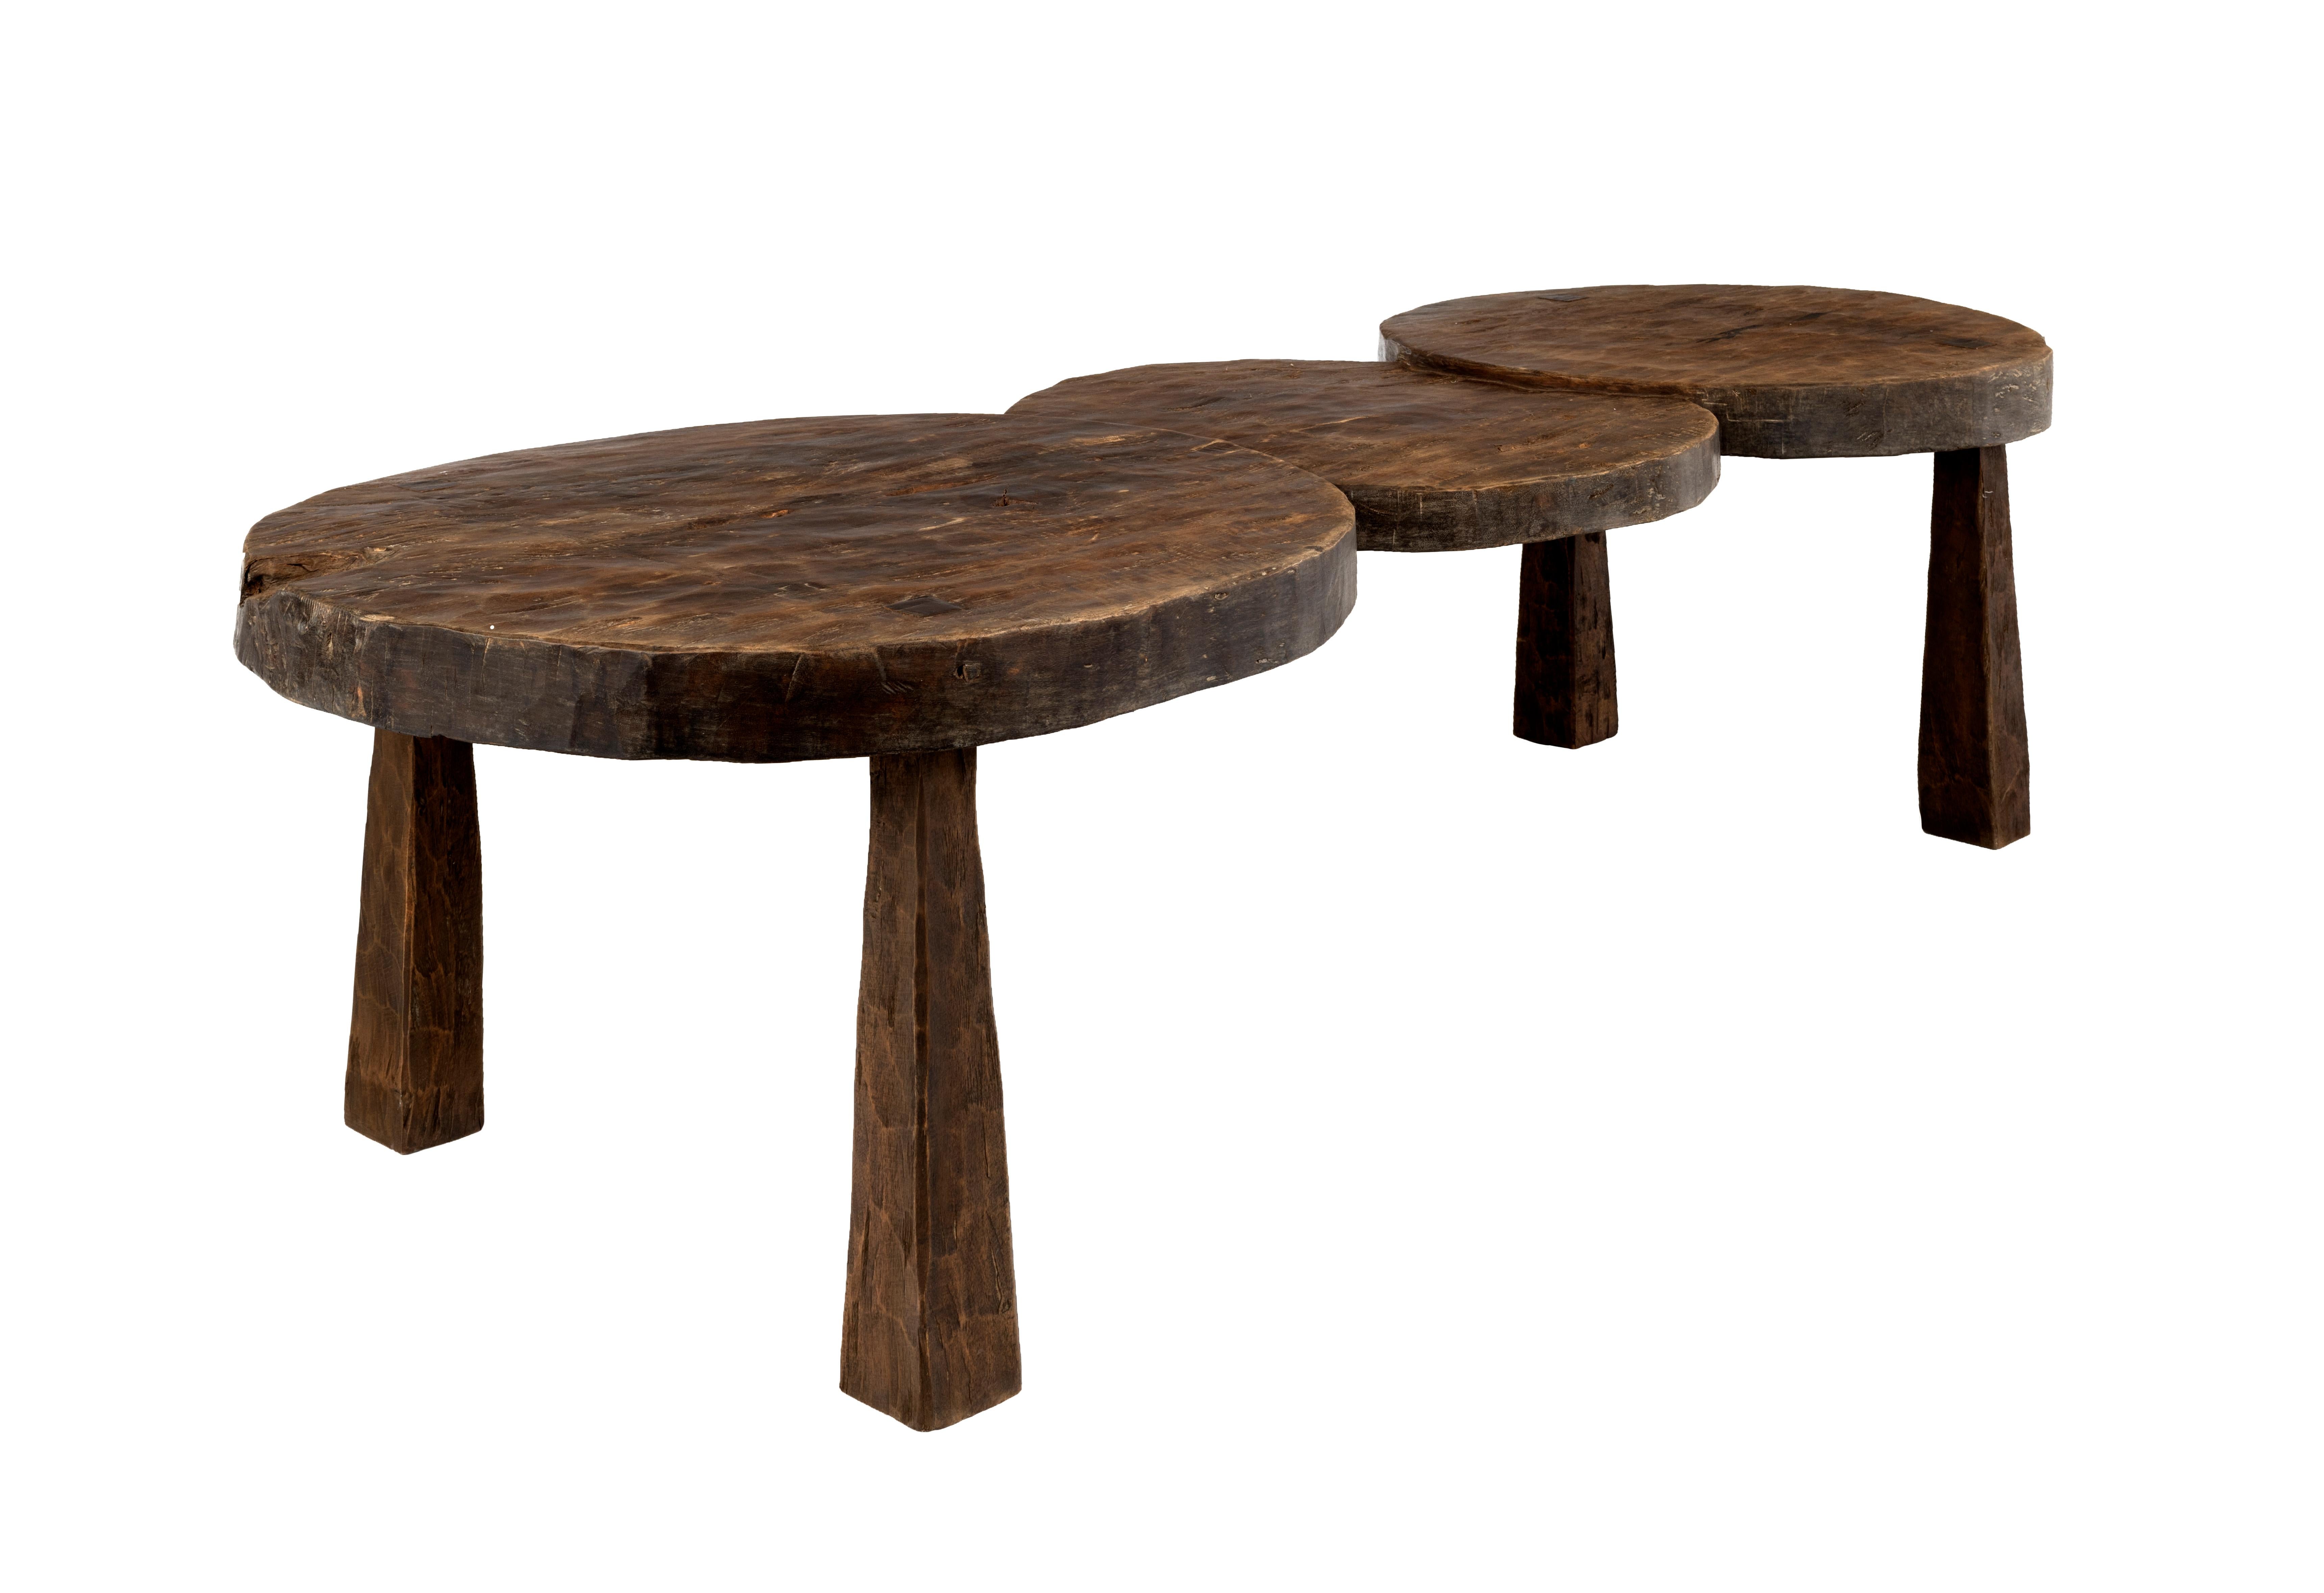 Organic Modern Three Circle Coffee Table or Bench Carved from One Plank